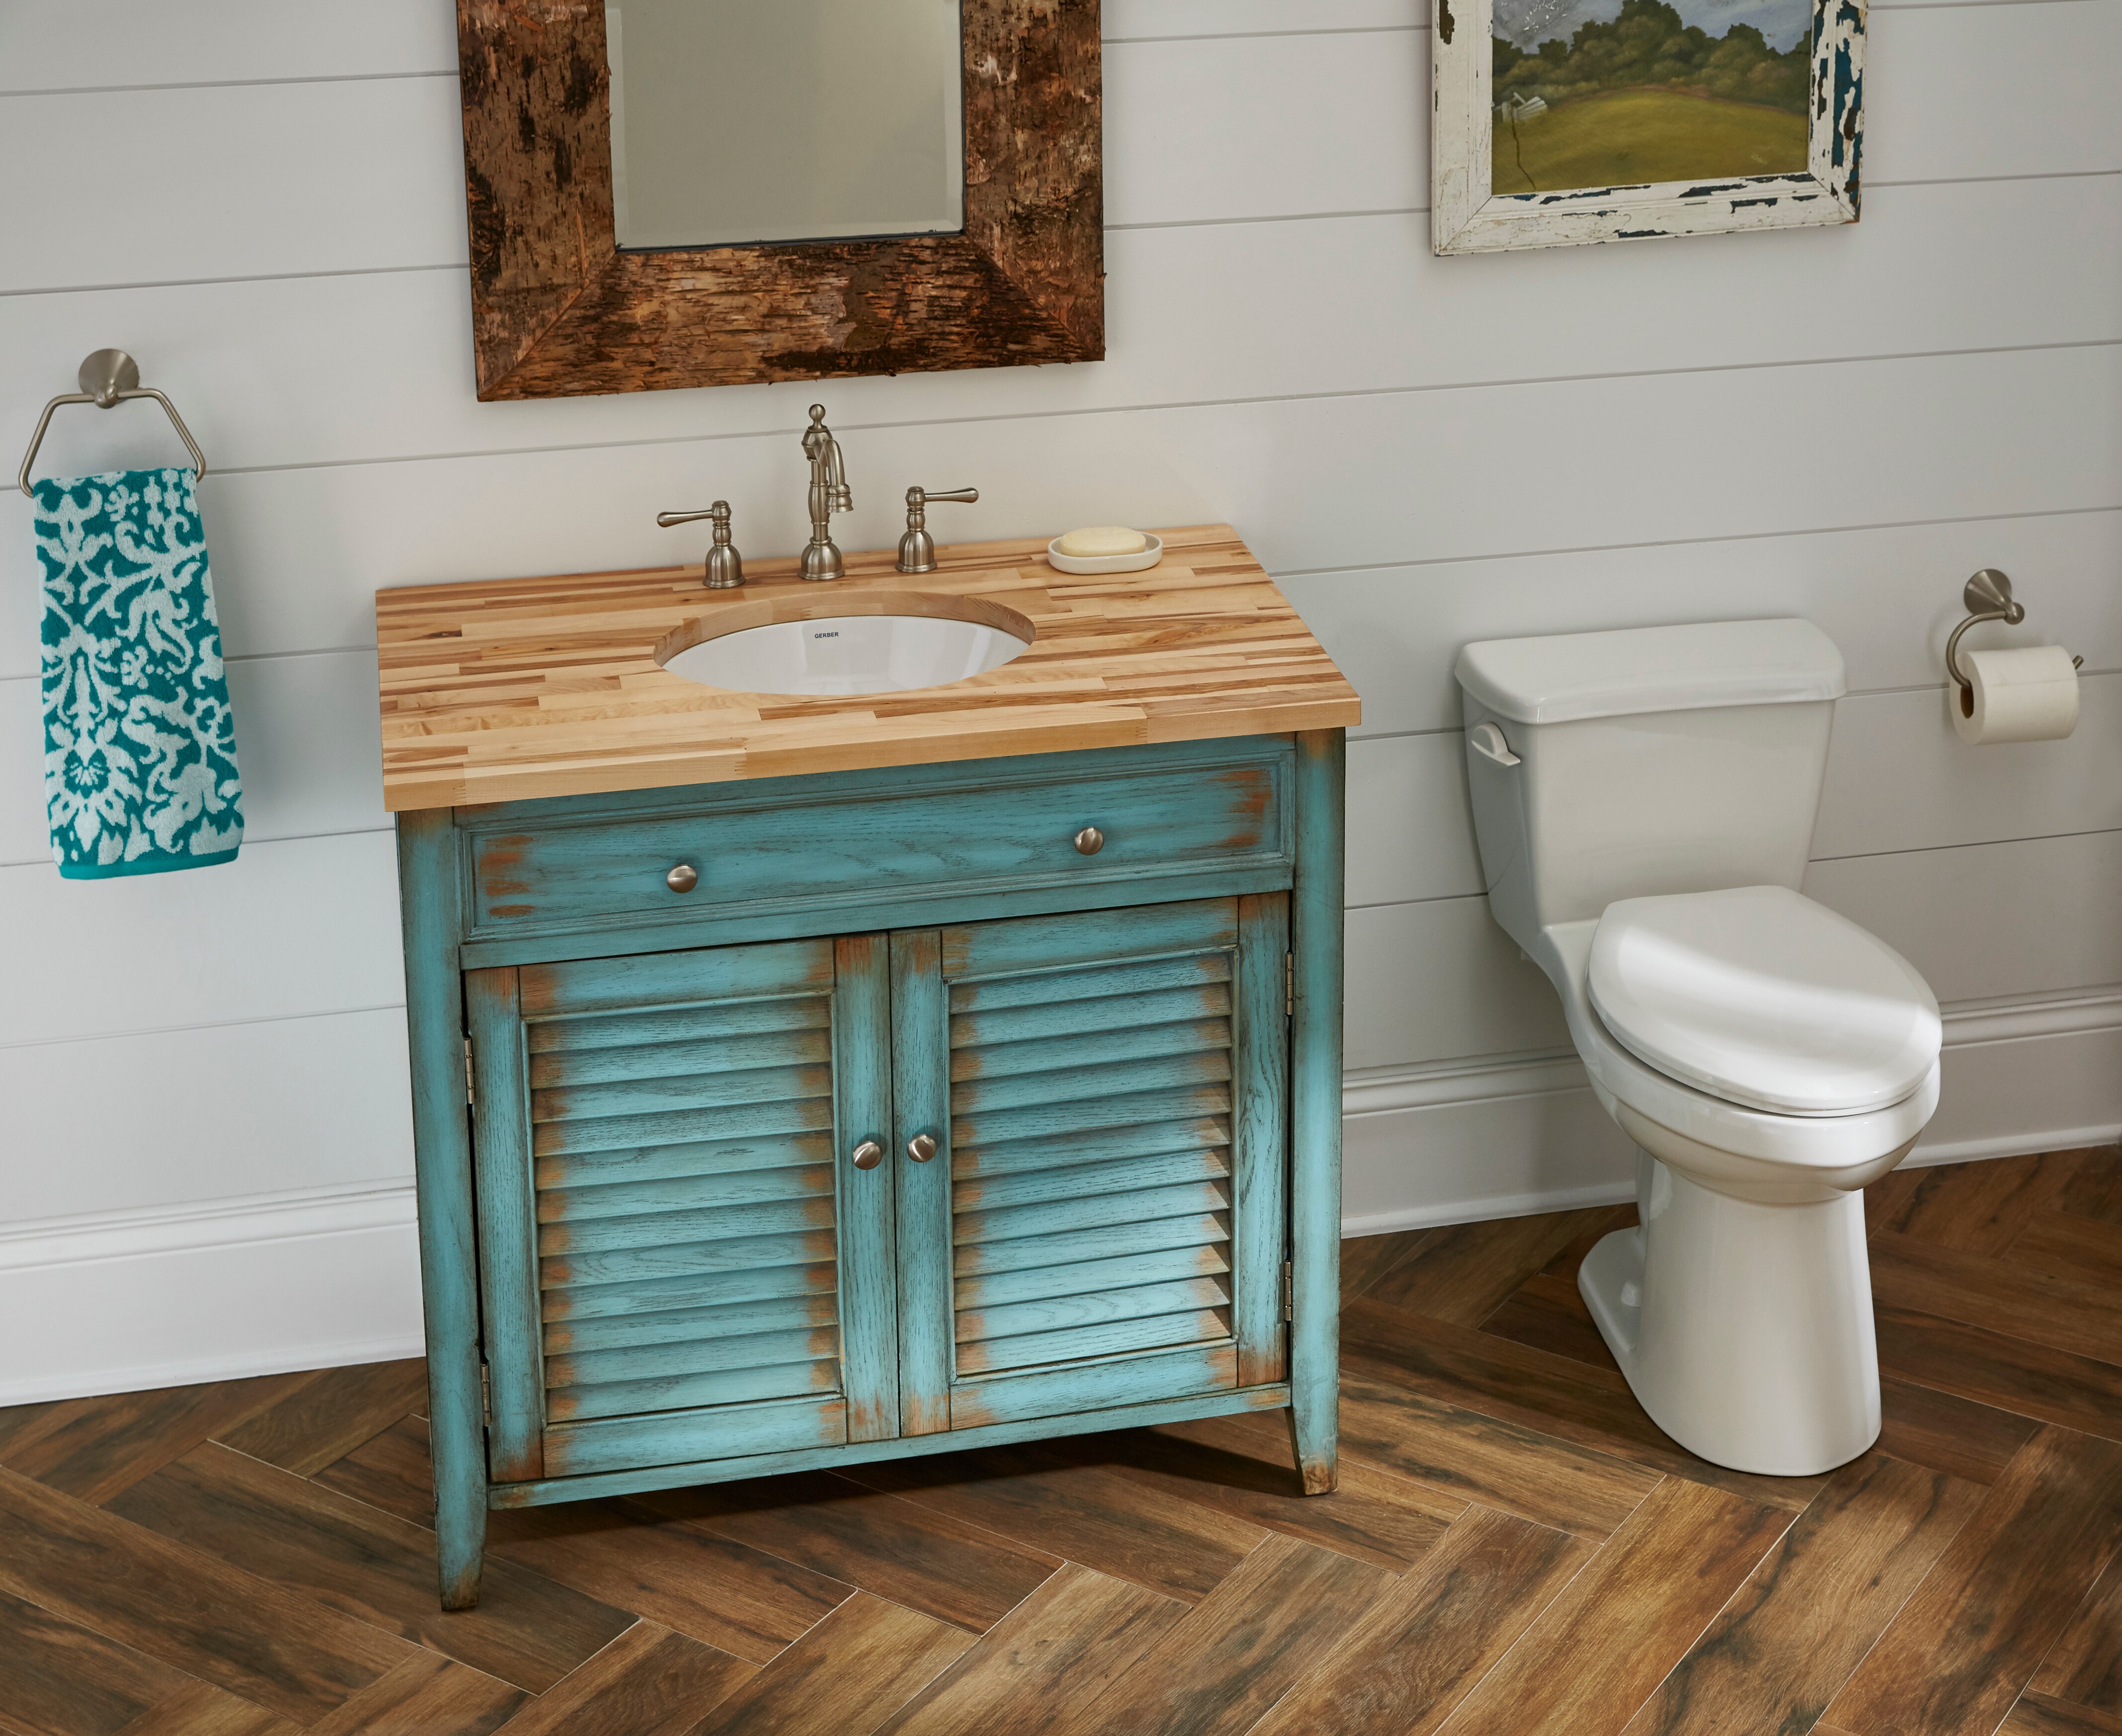 How To Remodel the Small Bathroom of Your Dreams